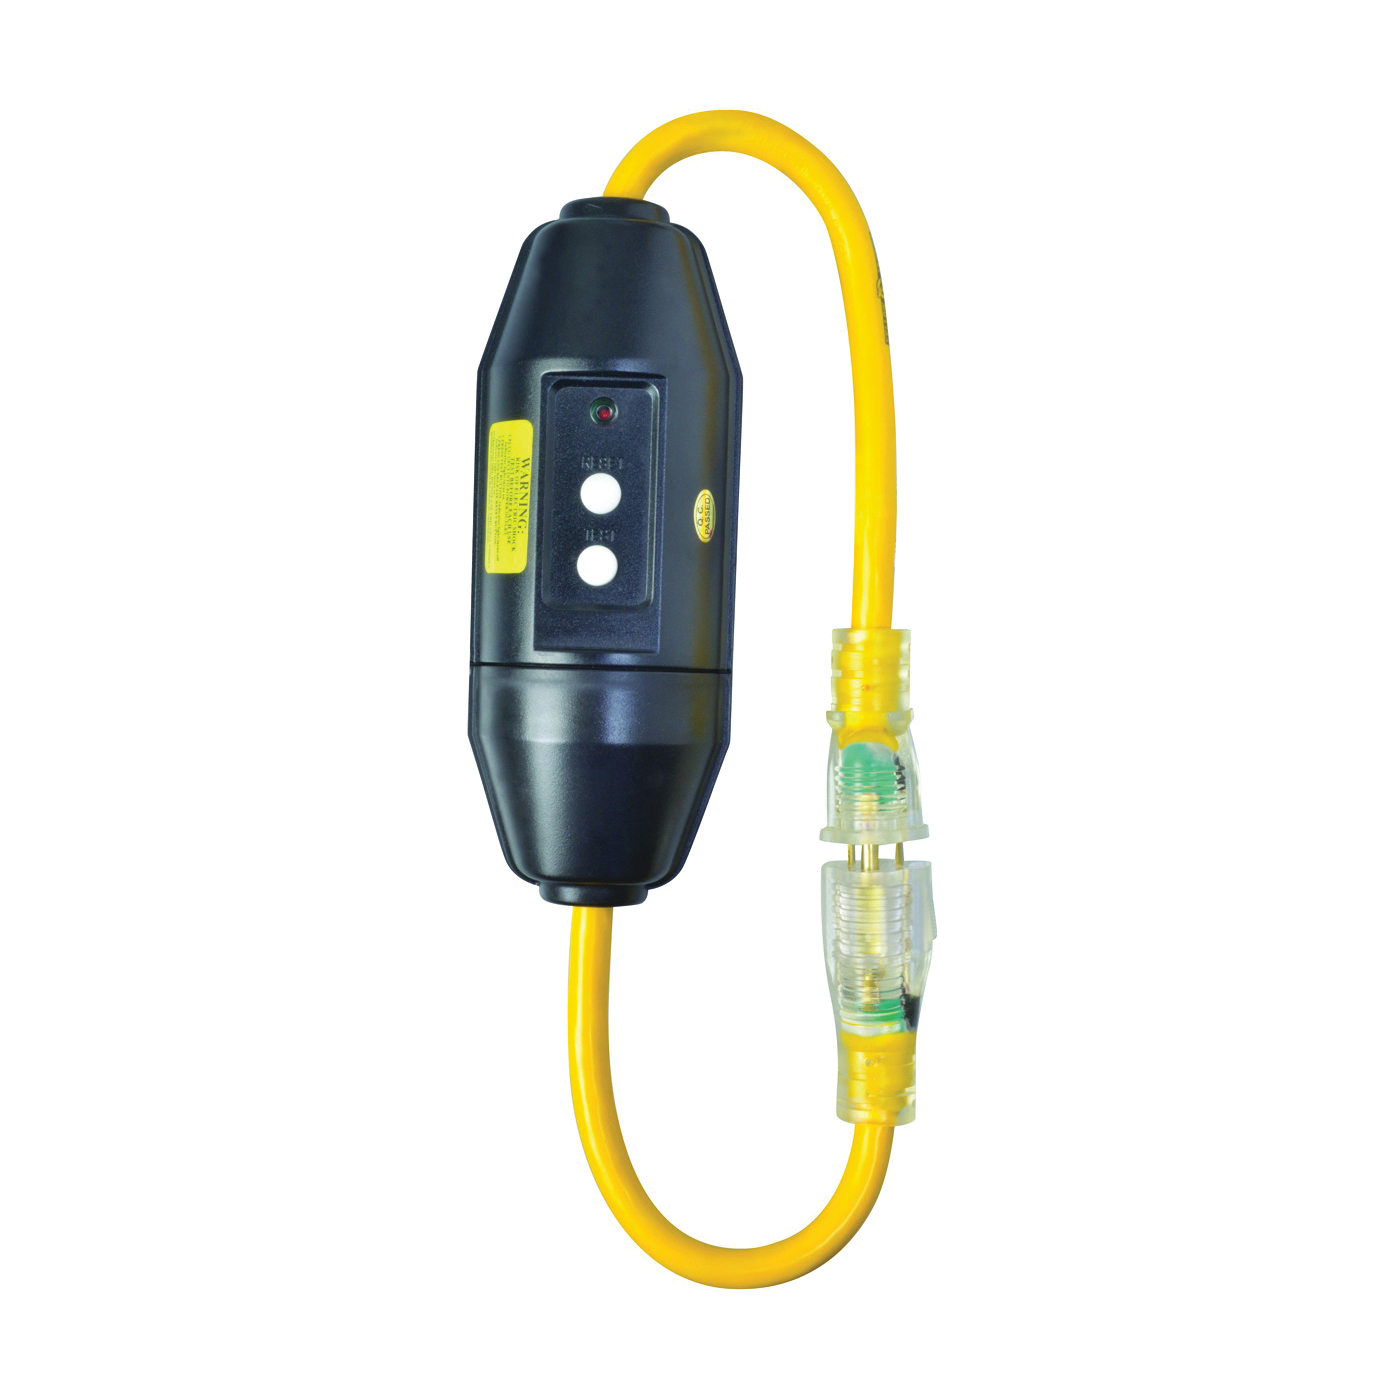 2817 Extension Cord, 2 ft Cable, 15 A, 125 V, Yellow